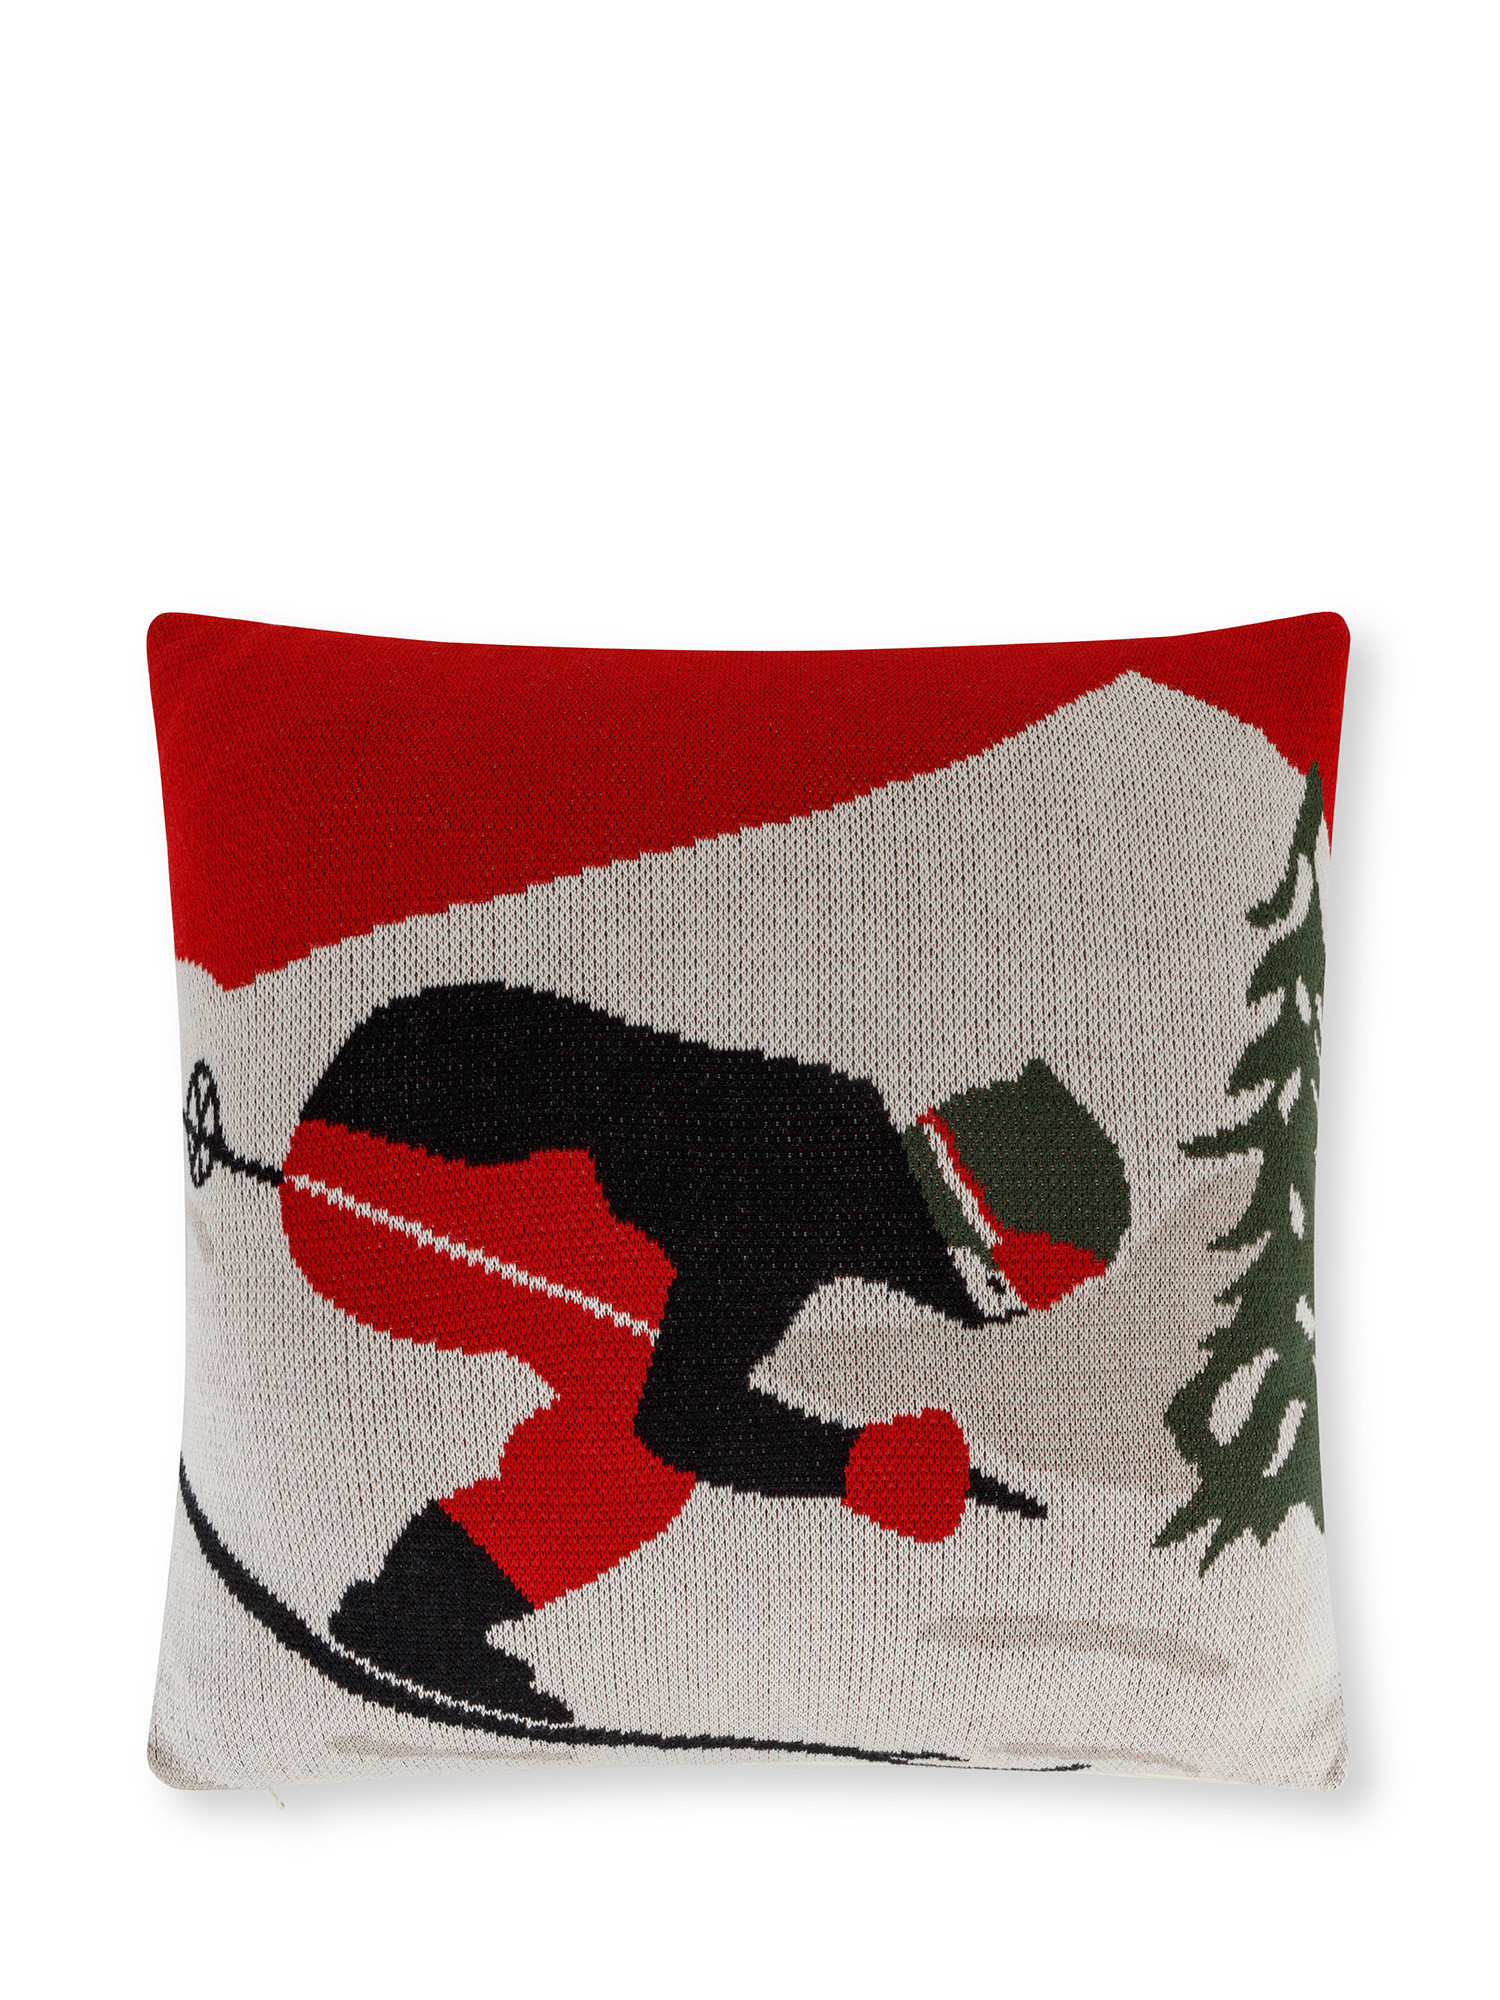 Jacquard knitted cushion with vintage skier motif 45x45 cm, Red, large image number 0